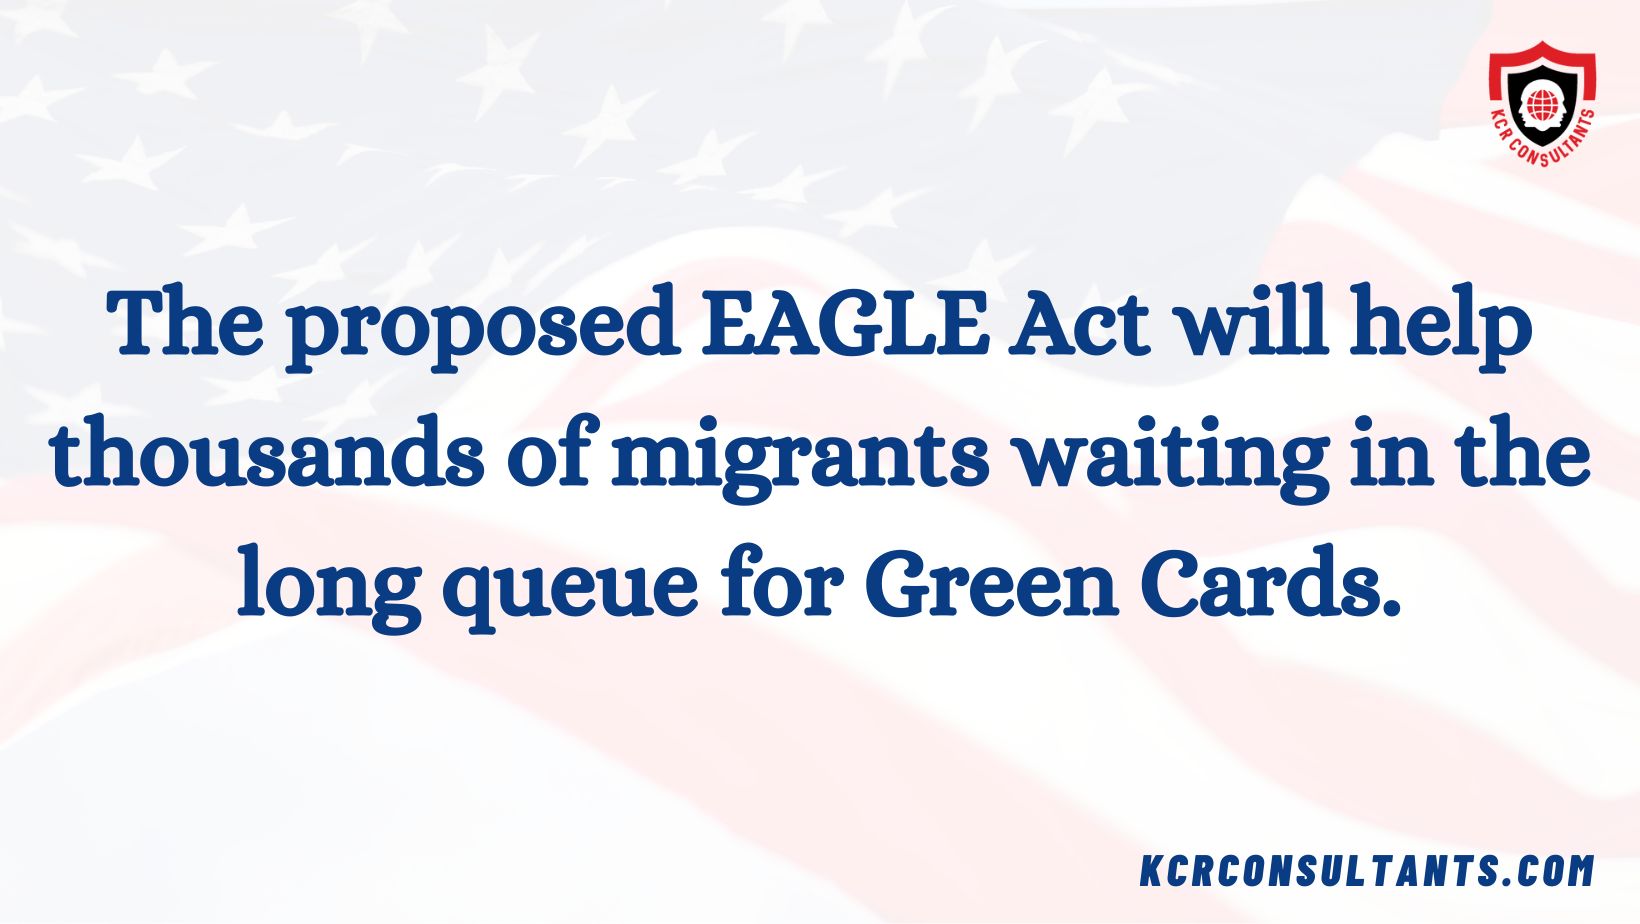 How will EAGLE Act ease this long waiting period